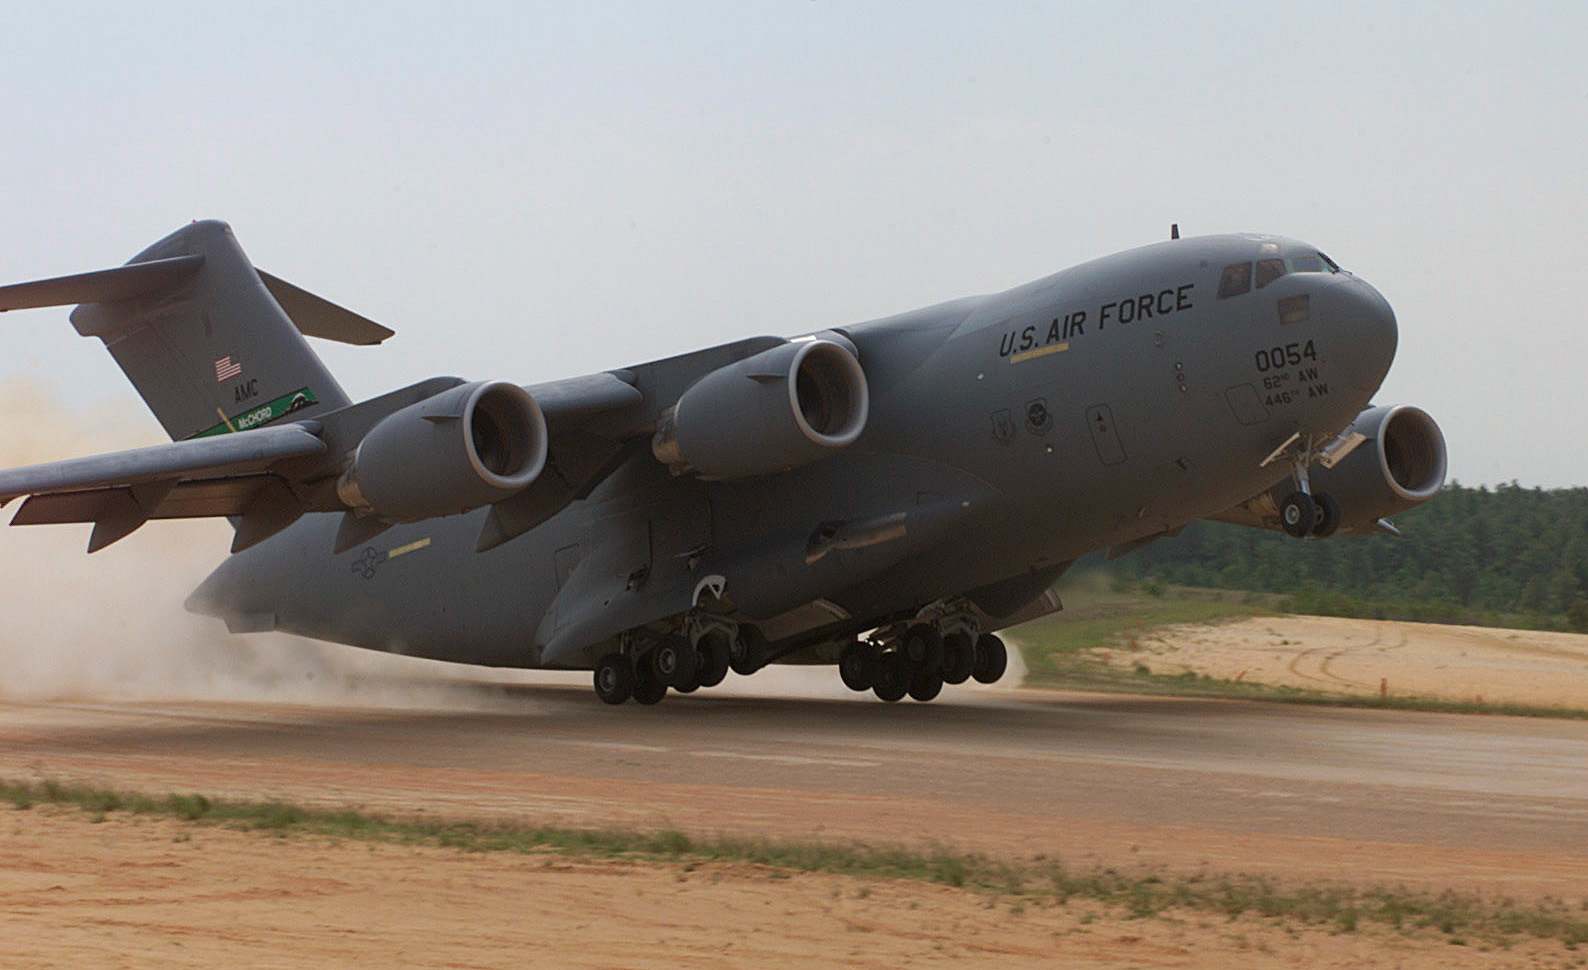 Uncovering the Advanced Design of the Boeing C-17 Globemaster III: Capabilities, Avionics, and Areas for Improvement